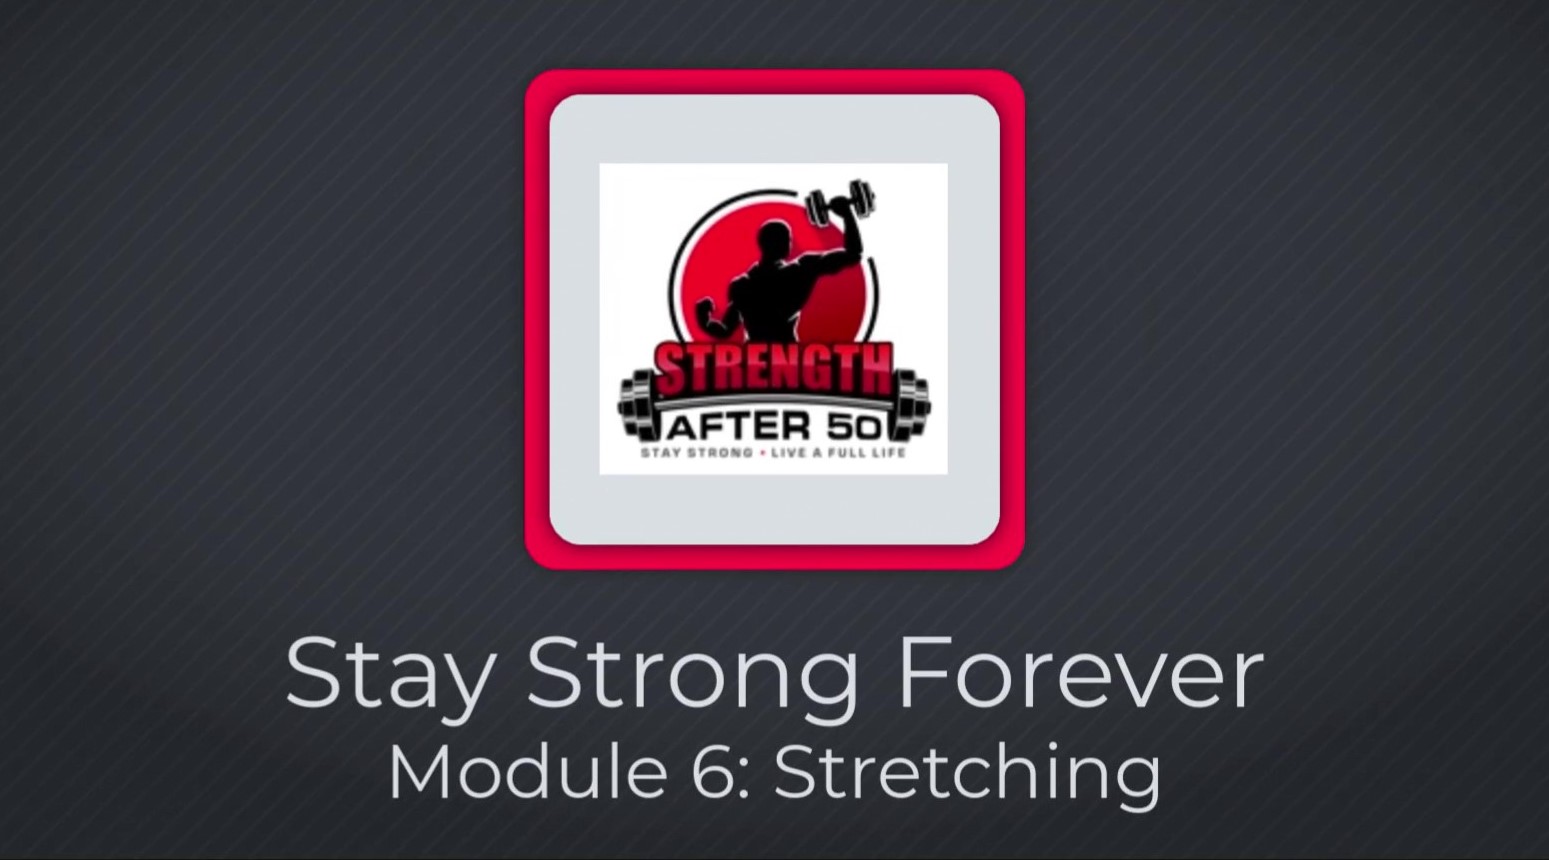 Stay Strong Forever E-Course Module 6